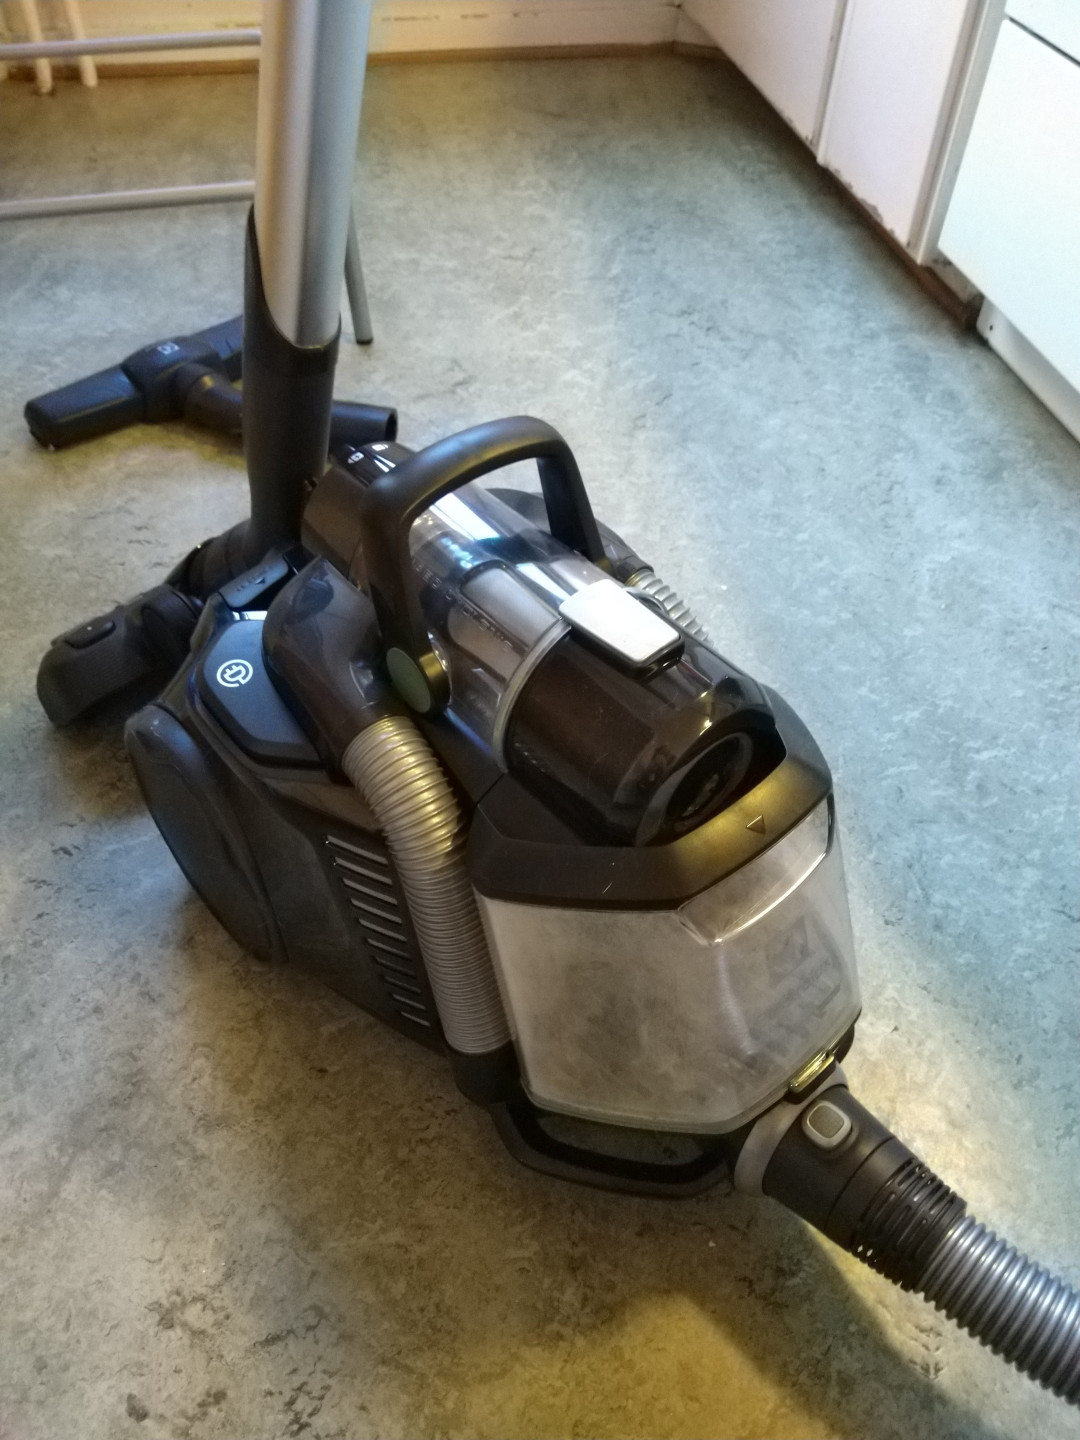 Yes, it's a vacuum cleaner